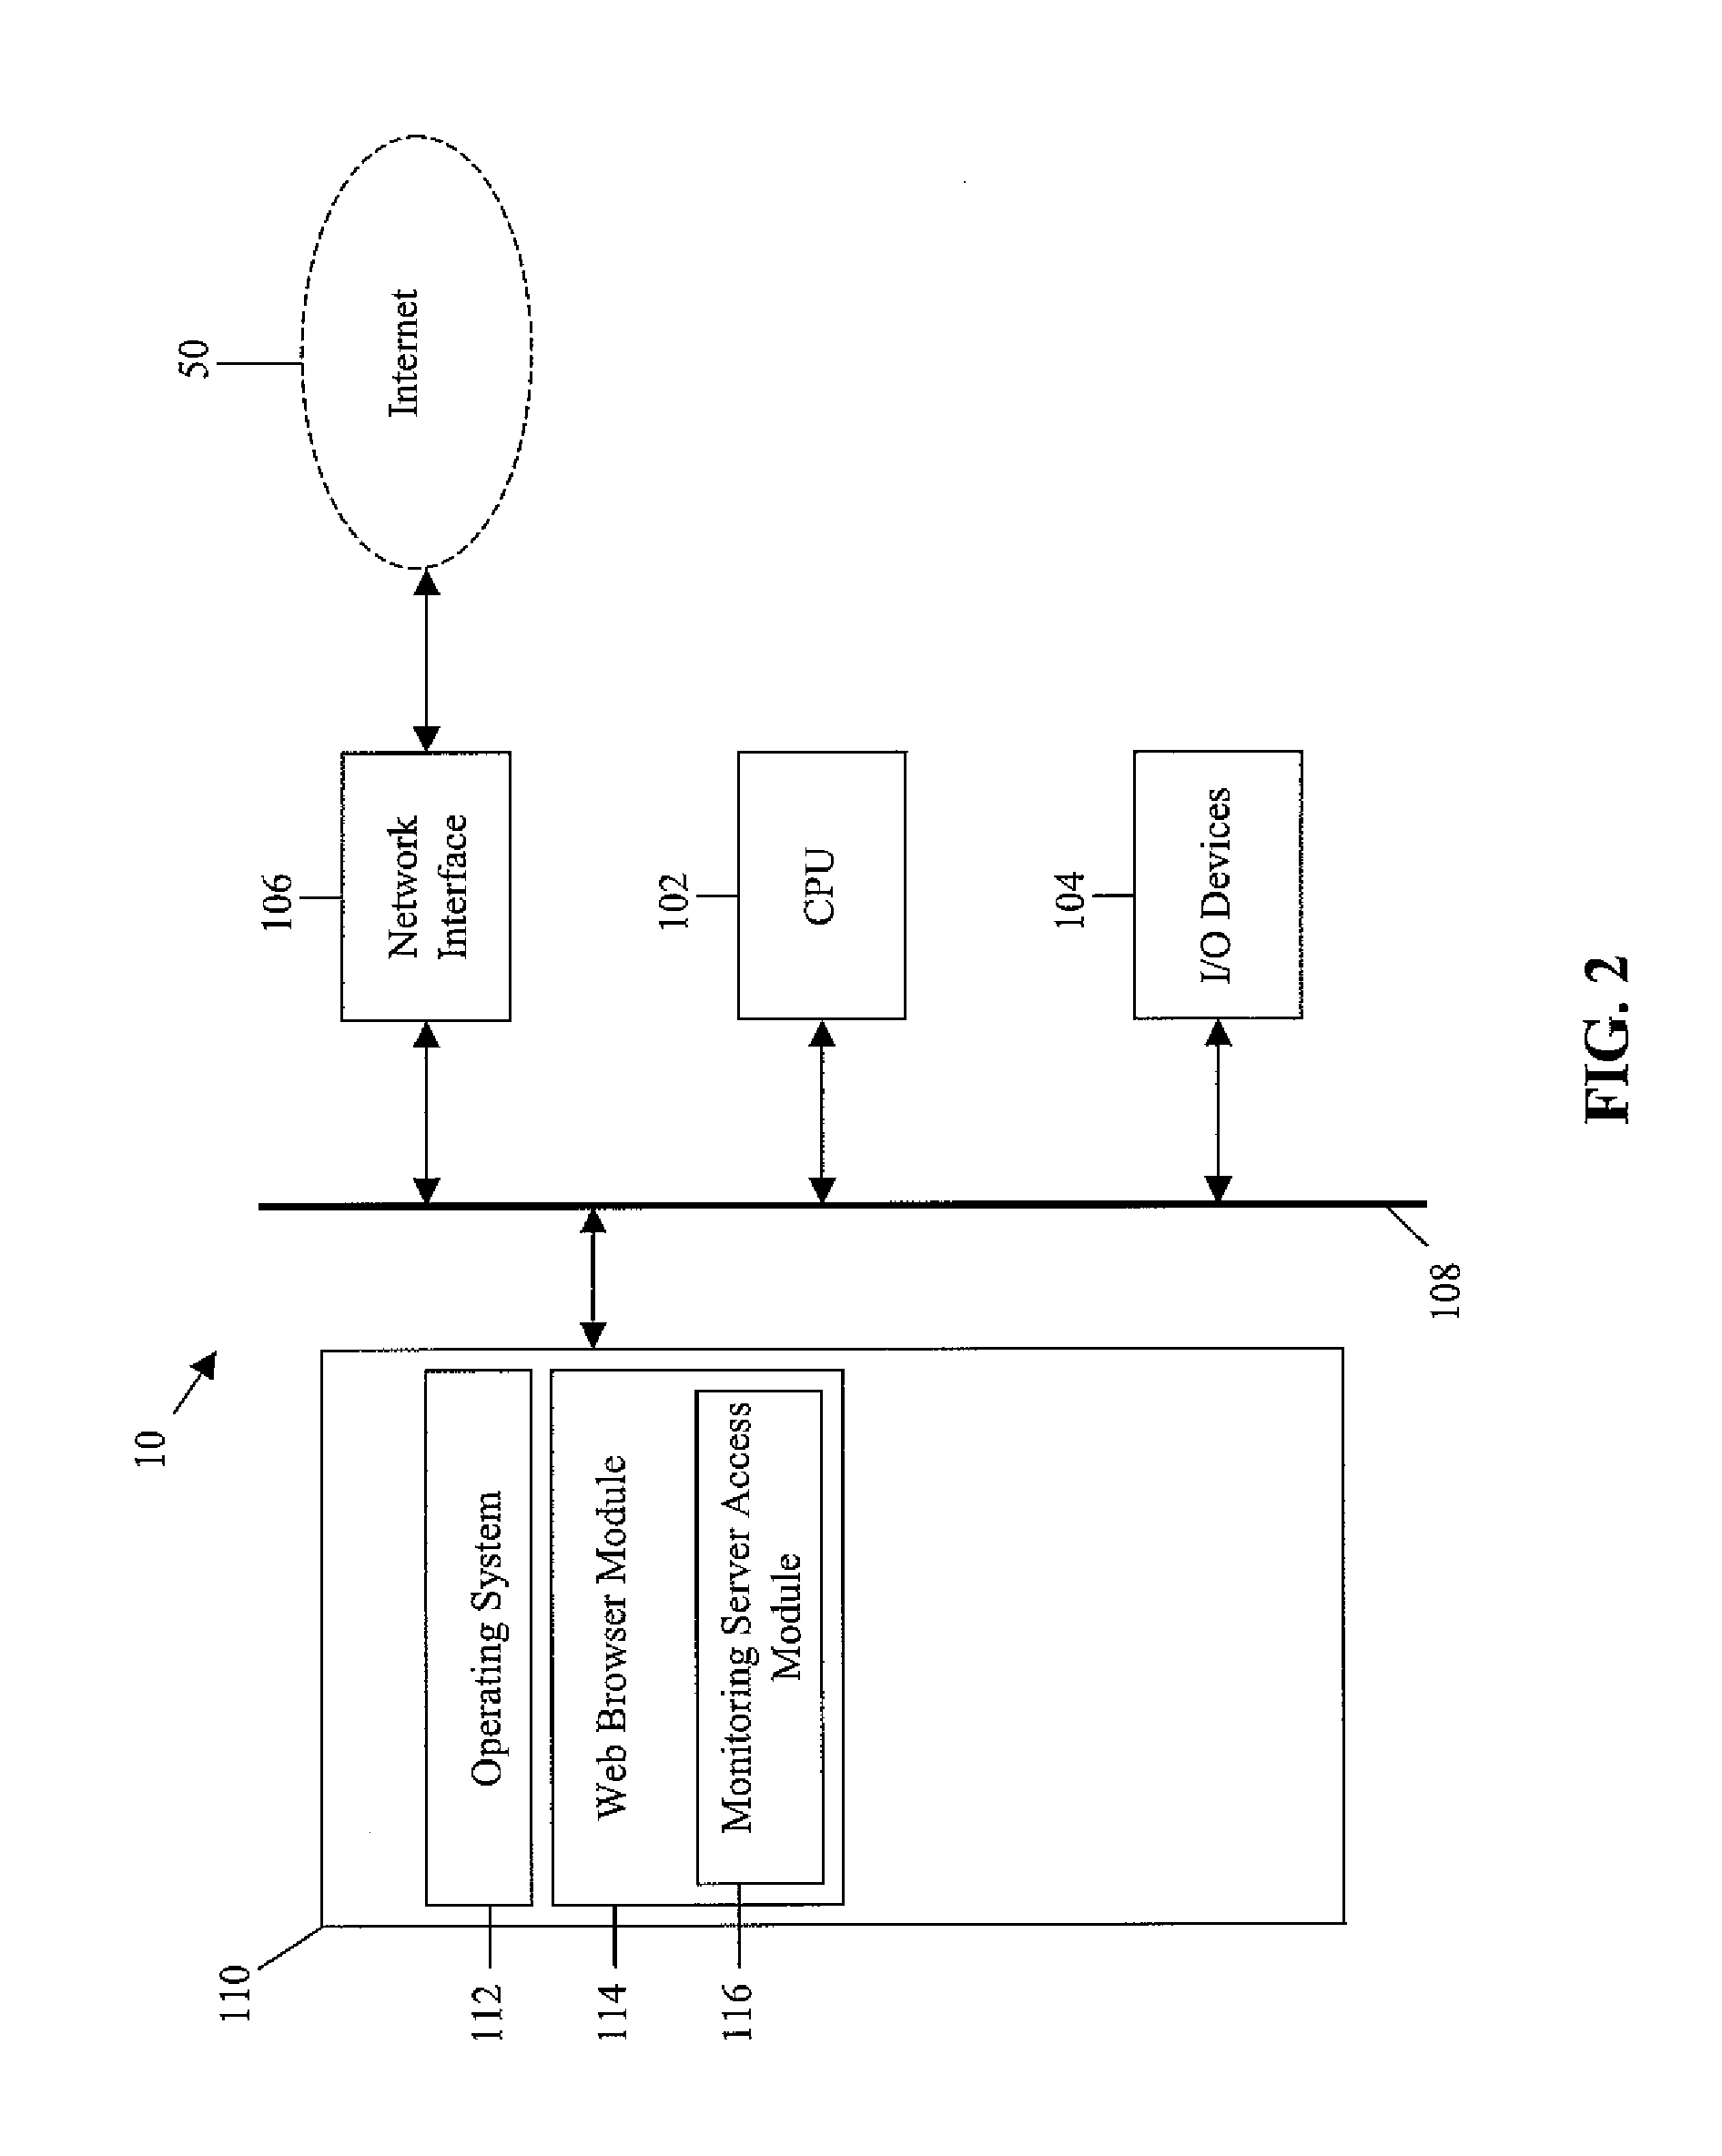 Systems and methods for predictive building energy monitoring